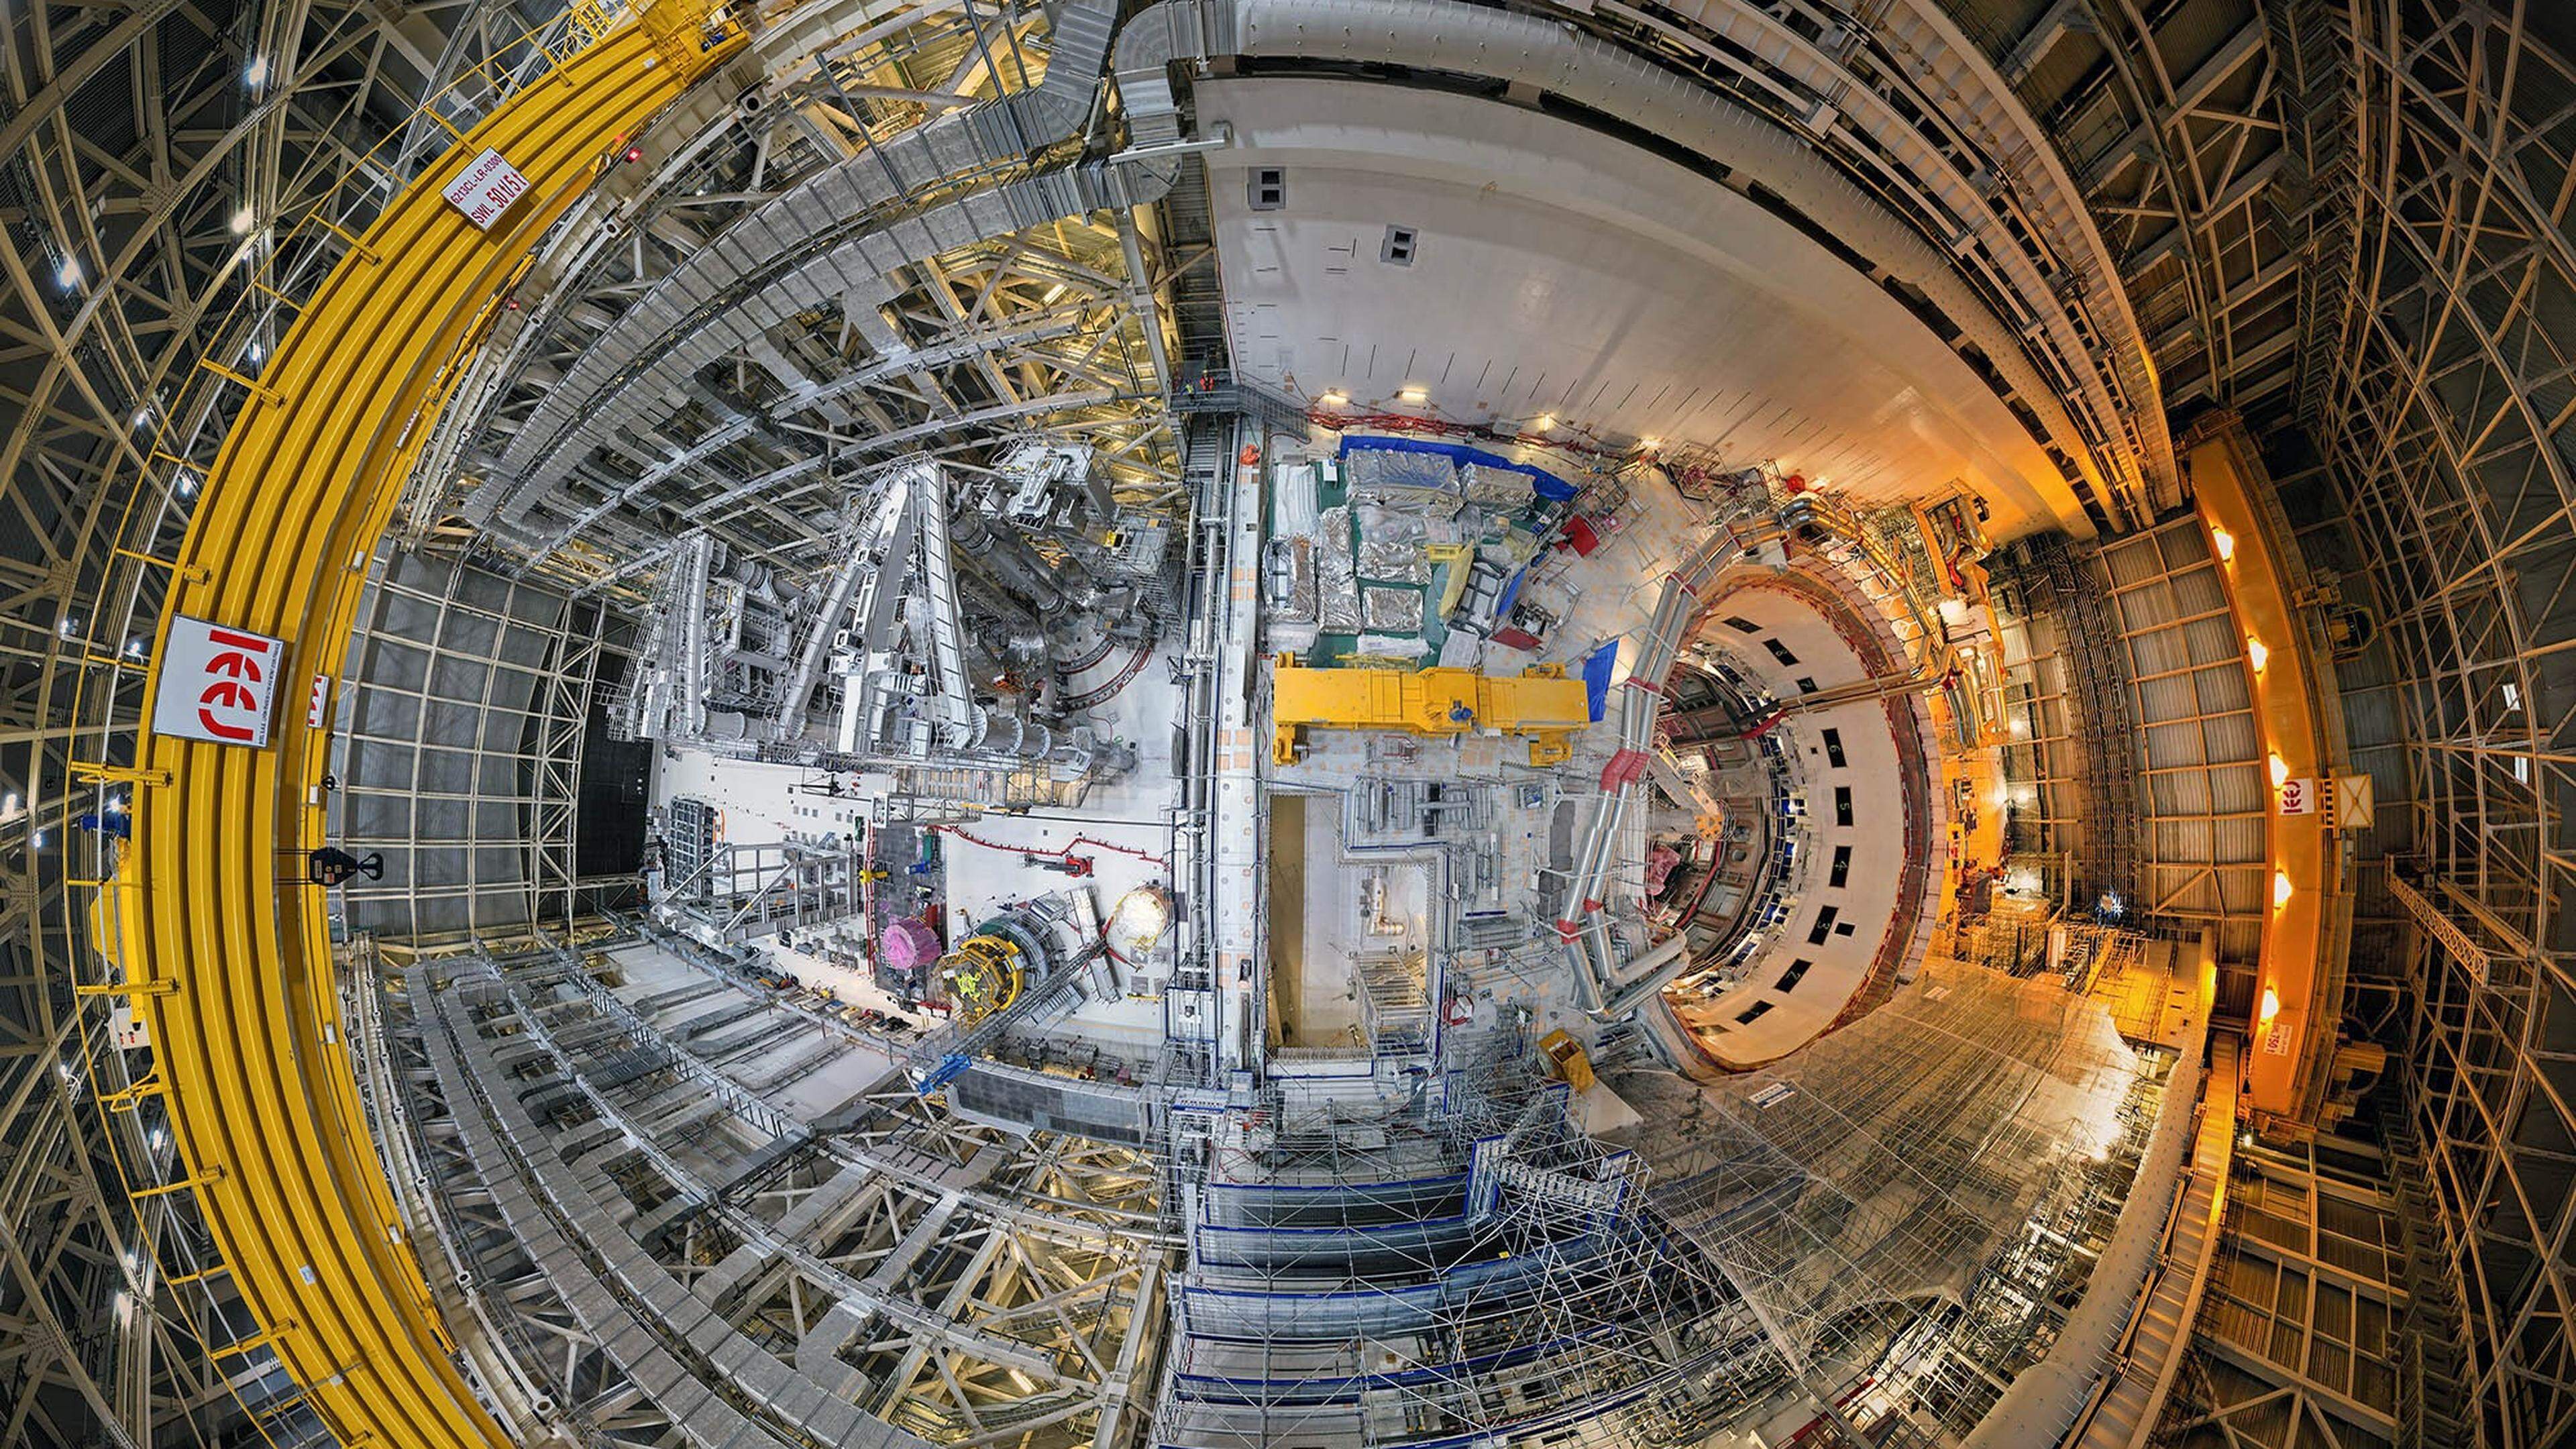 A view inside the pit assembly hall at the Iter nuclear fusion project in Saint-Paul-les-Durance, southern France